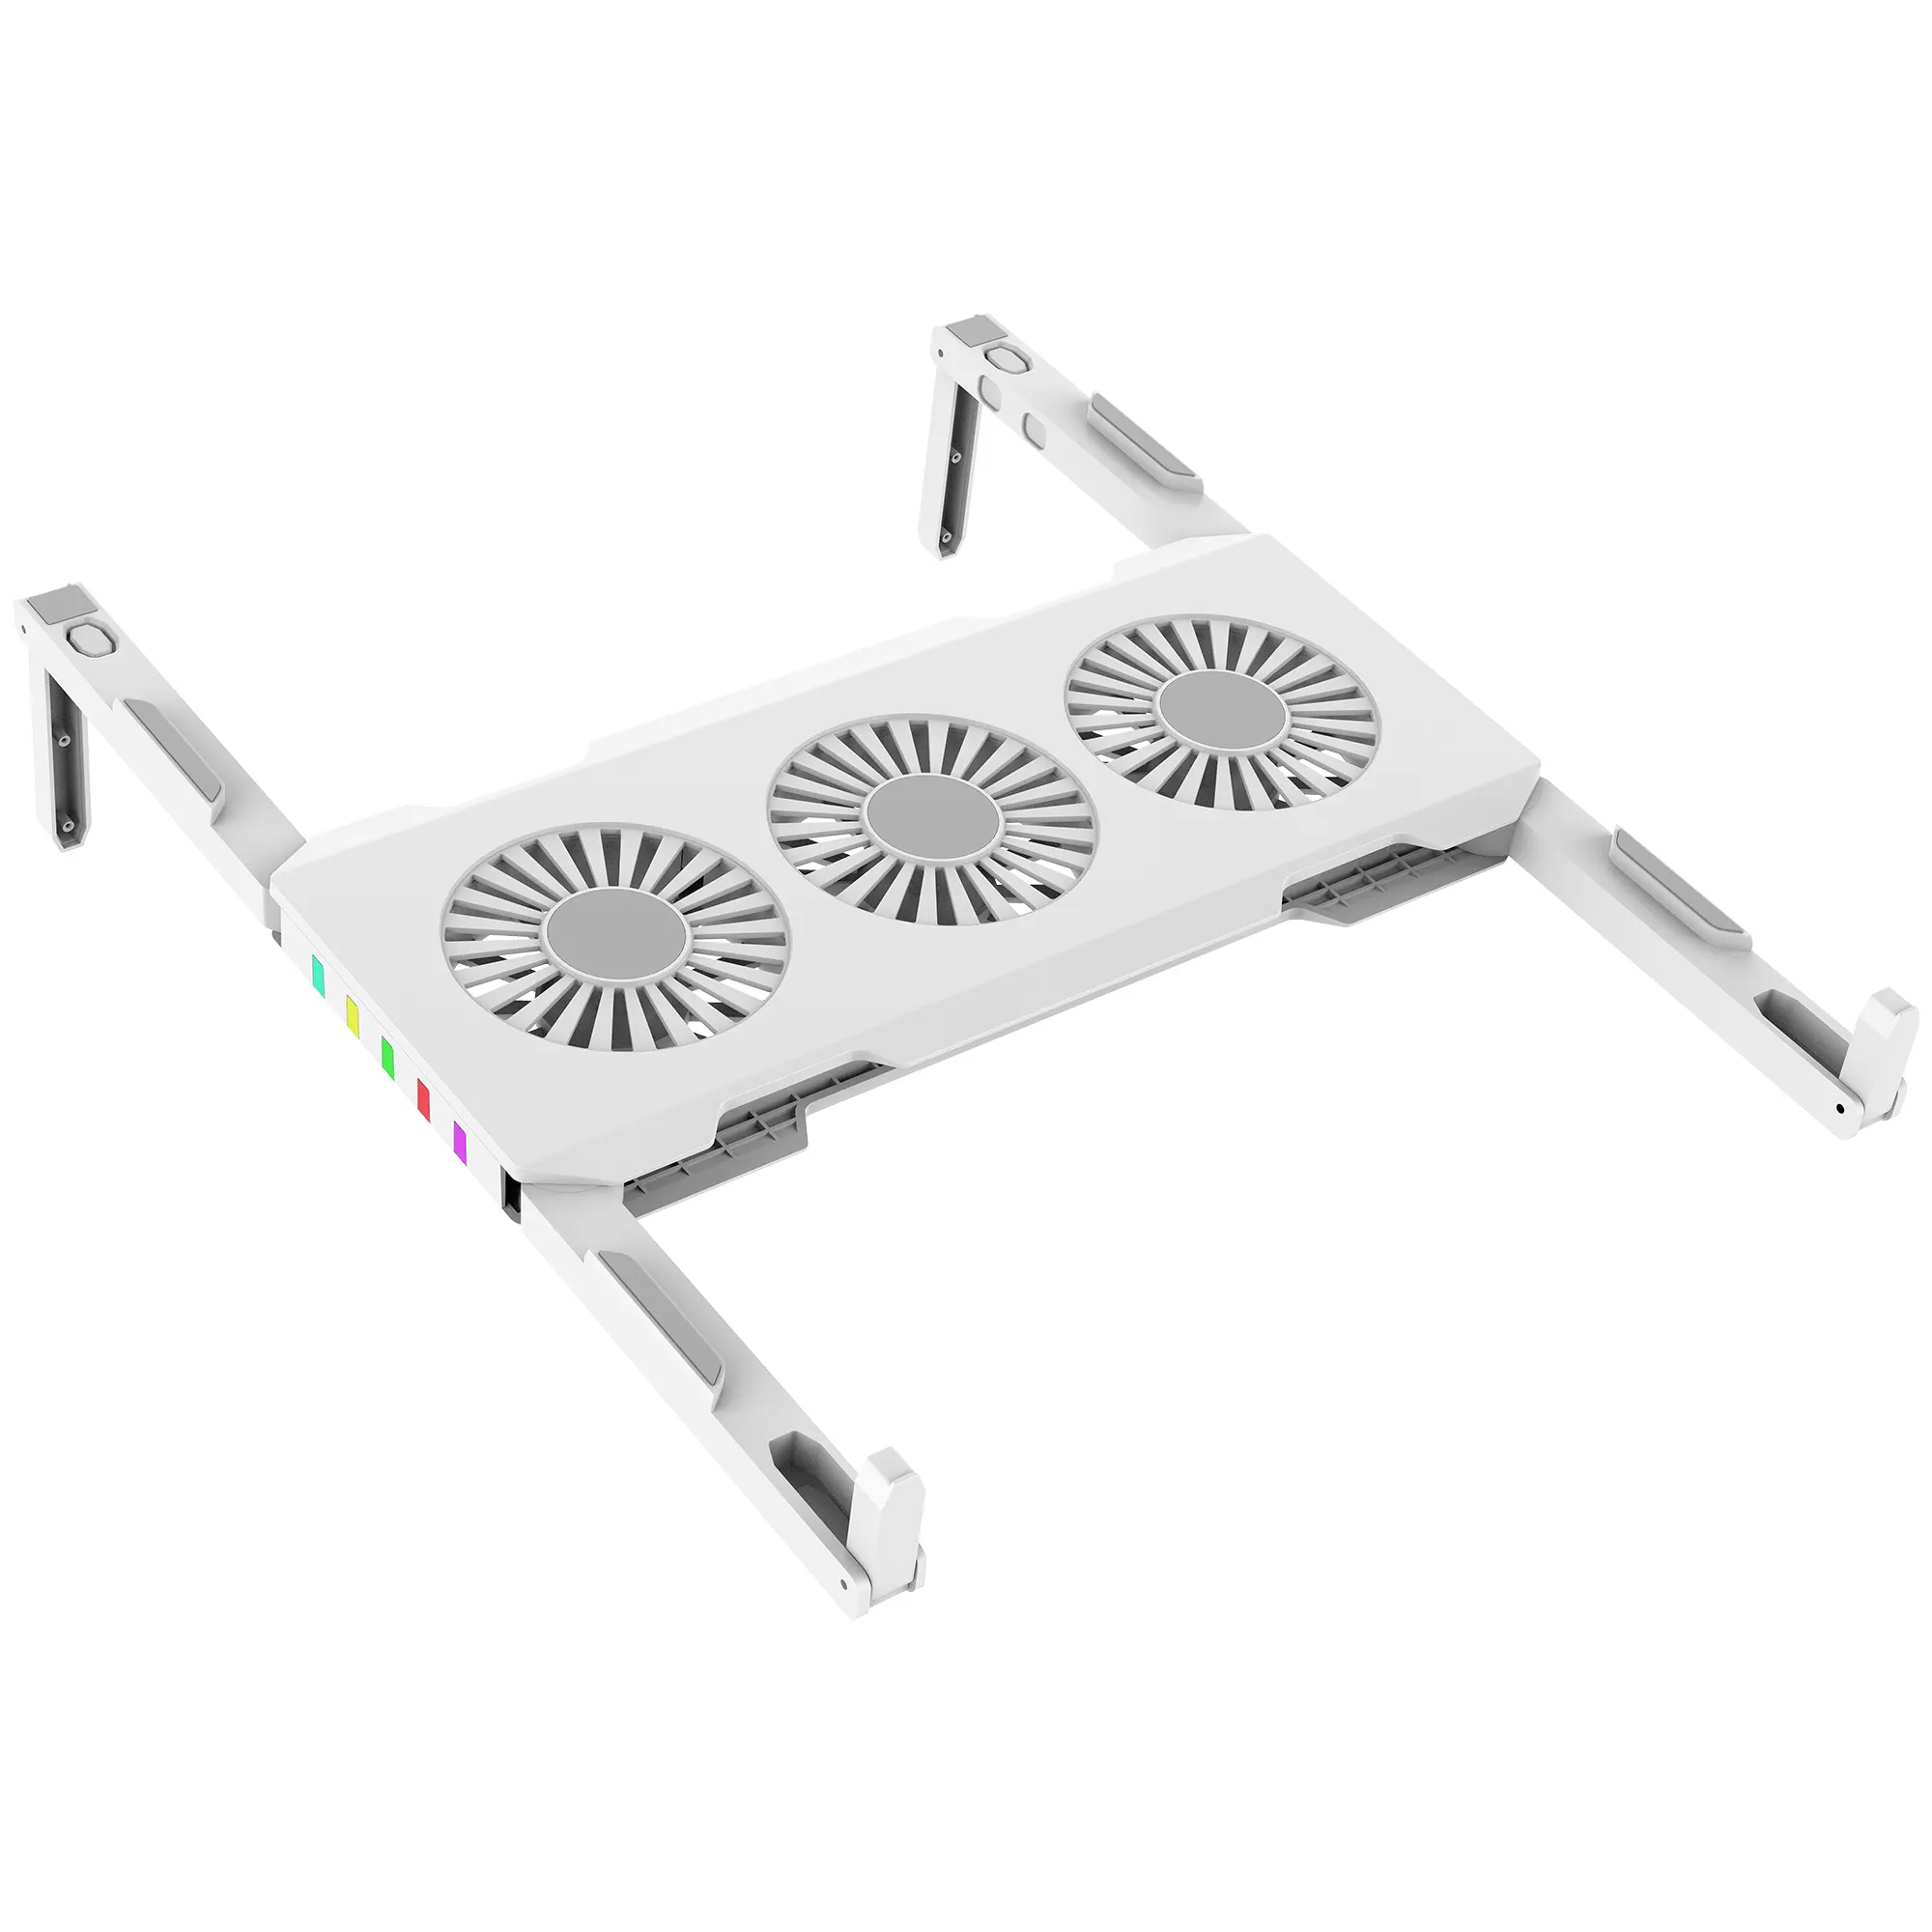 X1 Laptop Radiator Air Cooler Laptop Stand With 3 Fans Tablet Radiator Fan Base Mute Suitable For 12-18 Inch Cooling Pad